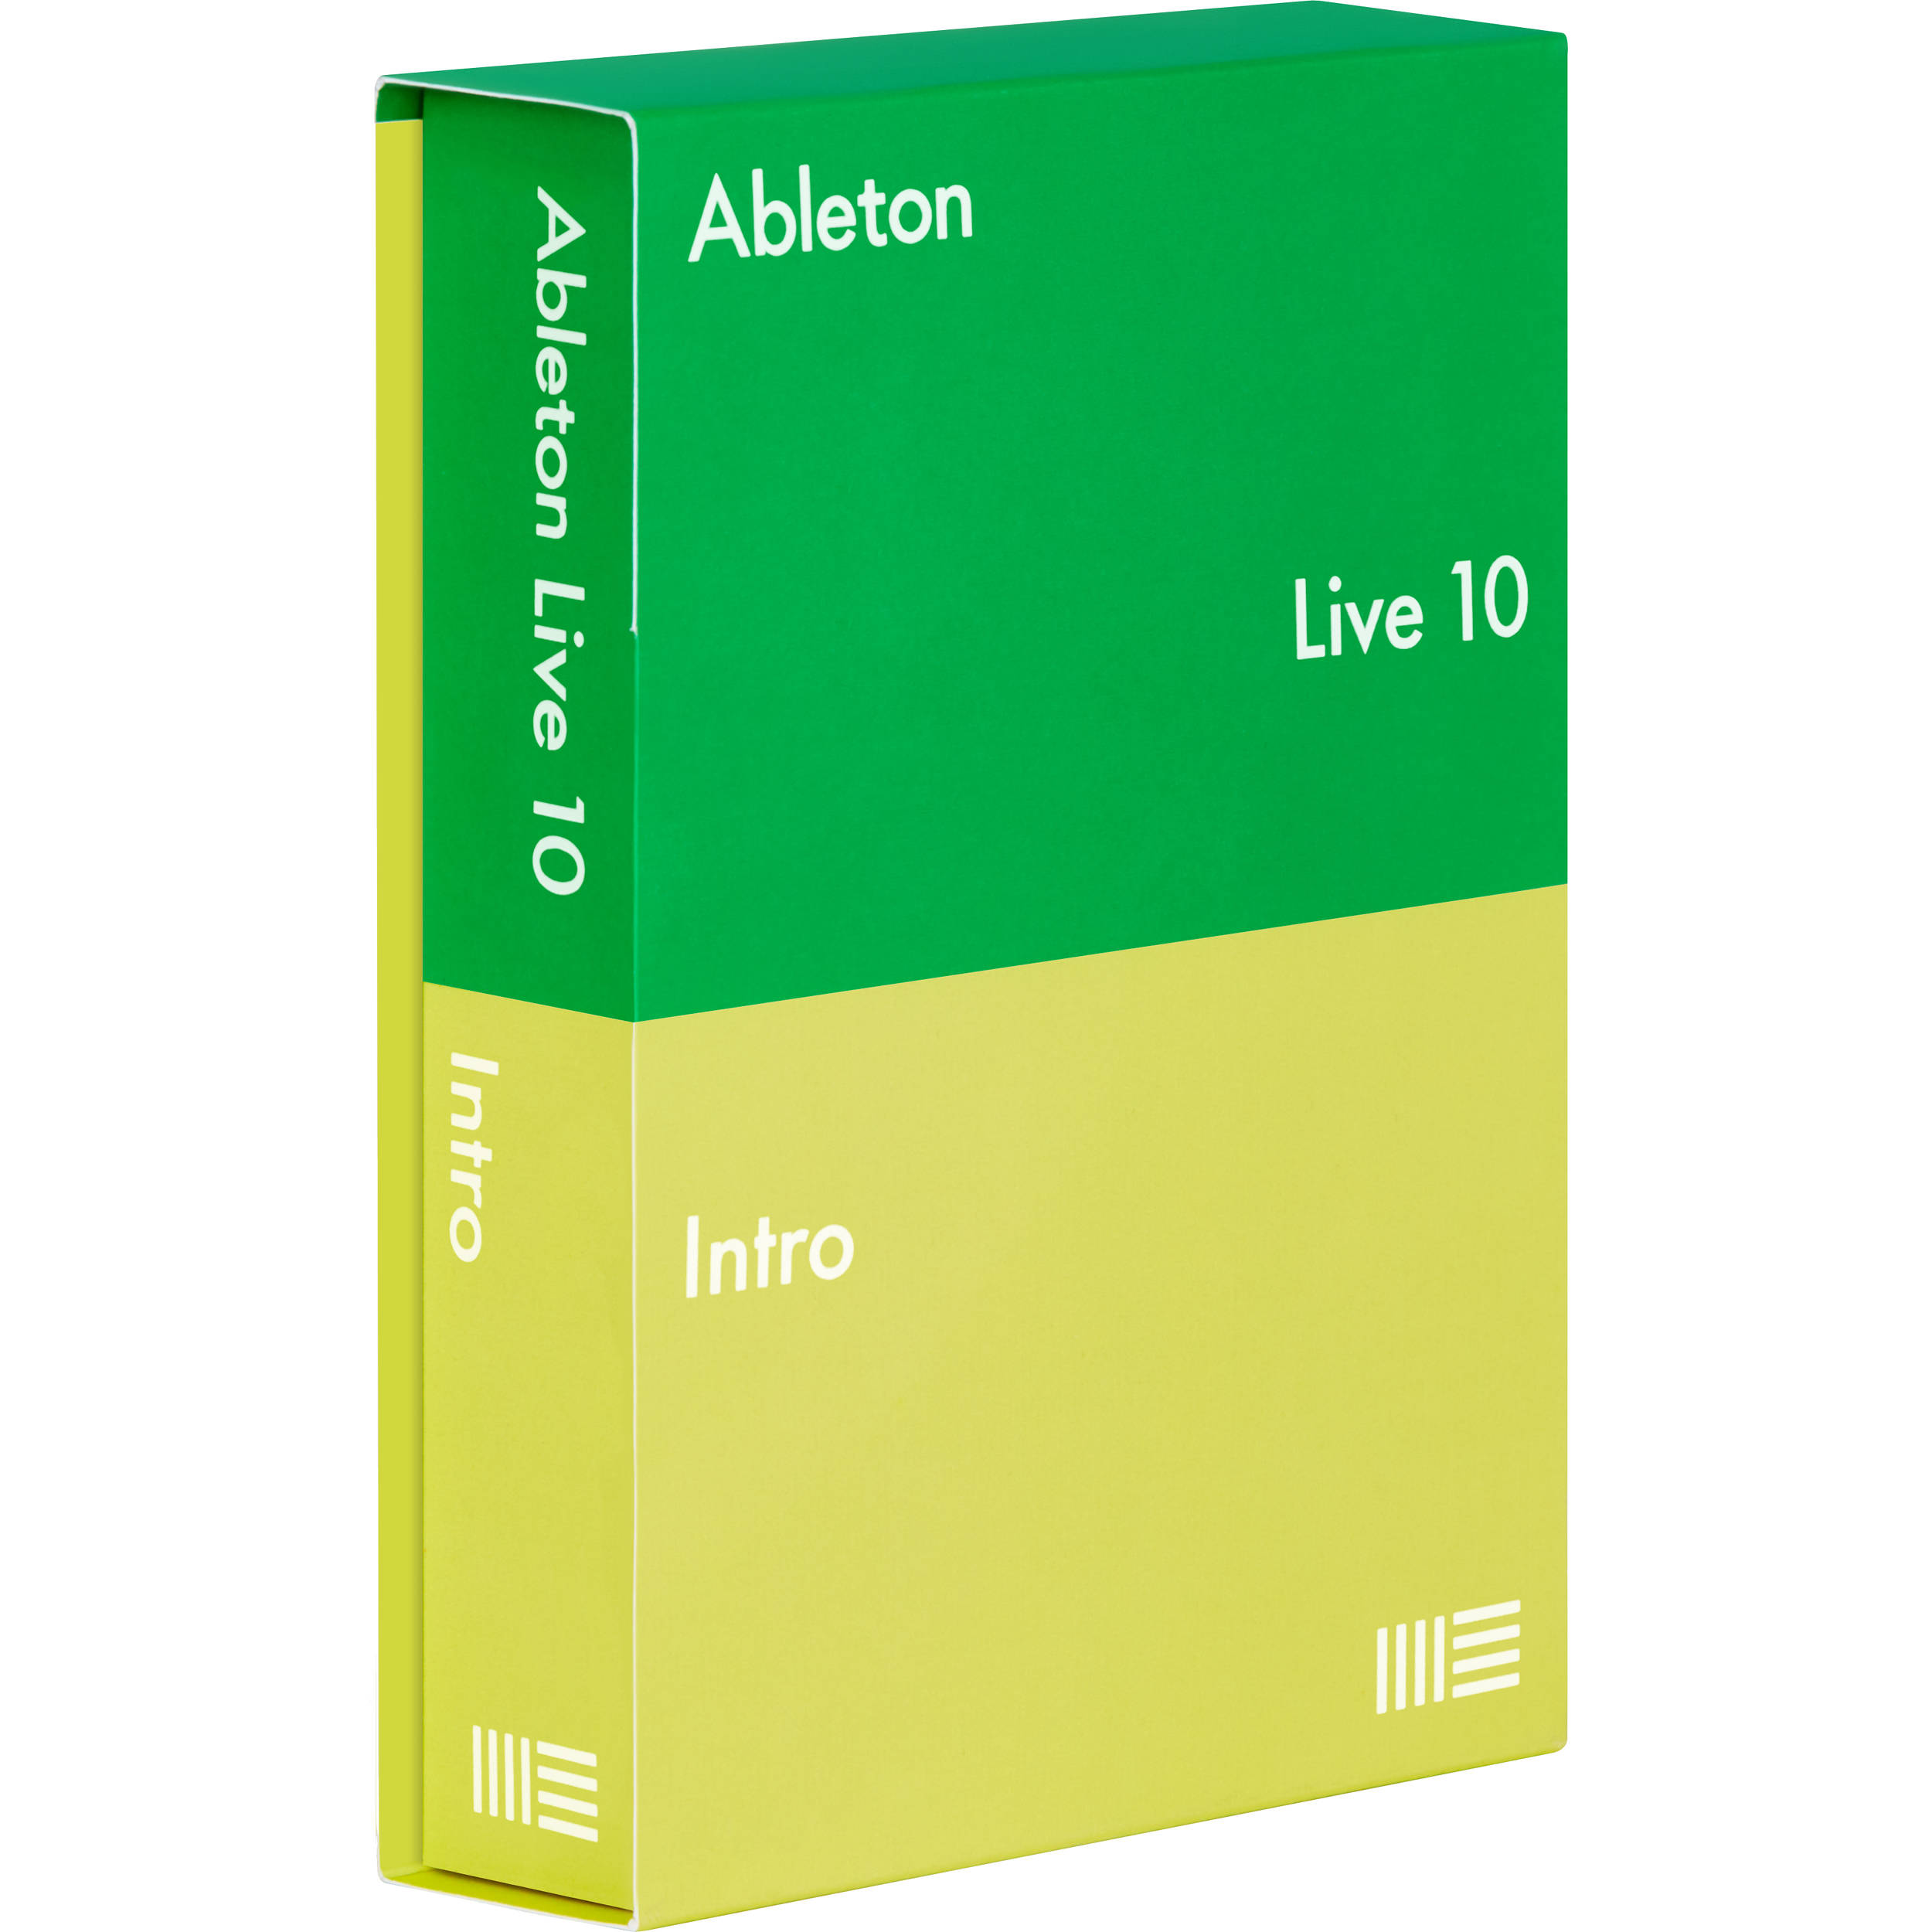 Ableton Live 10 Full Mac 11.1.6 Crack With Serial Key Download Free